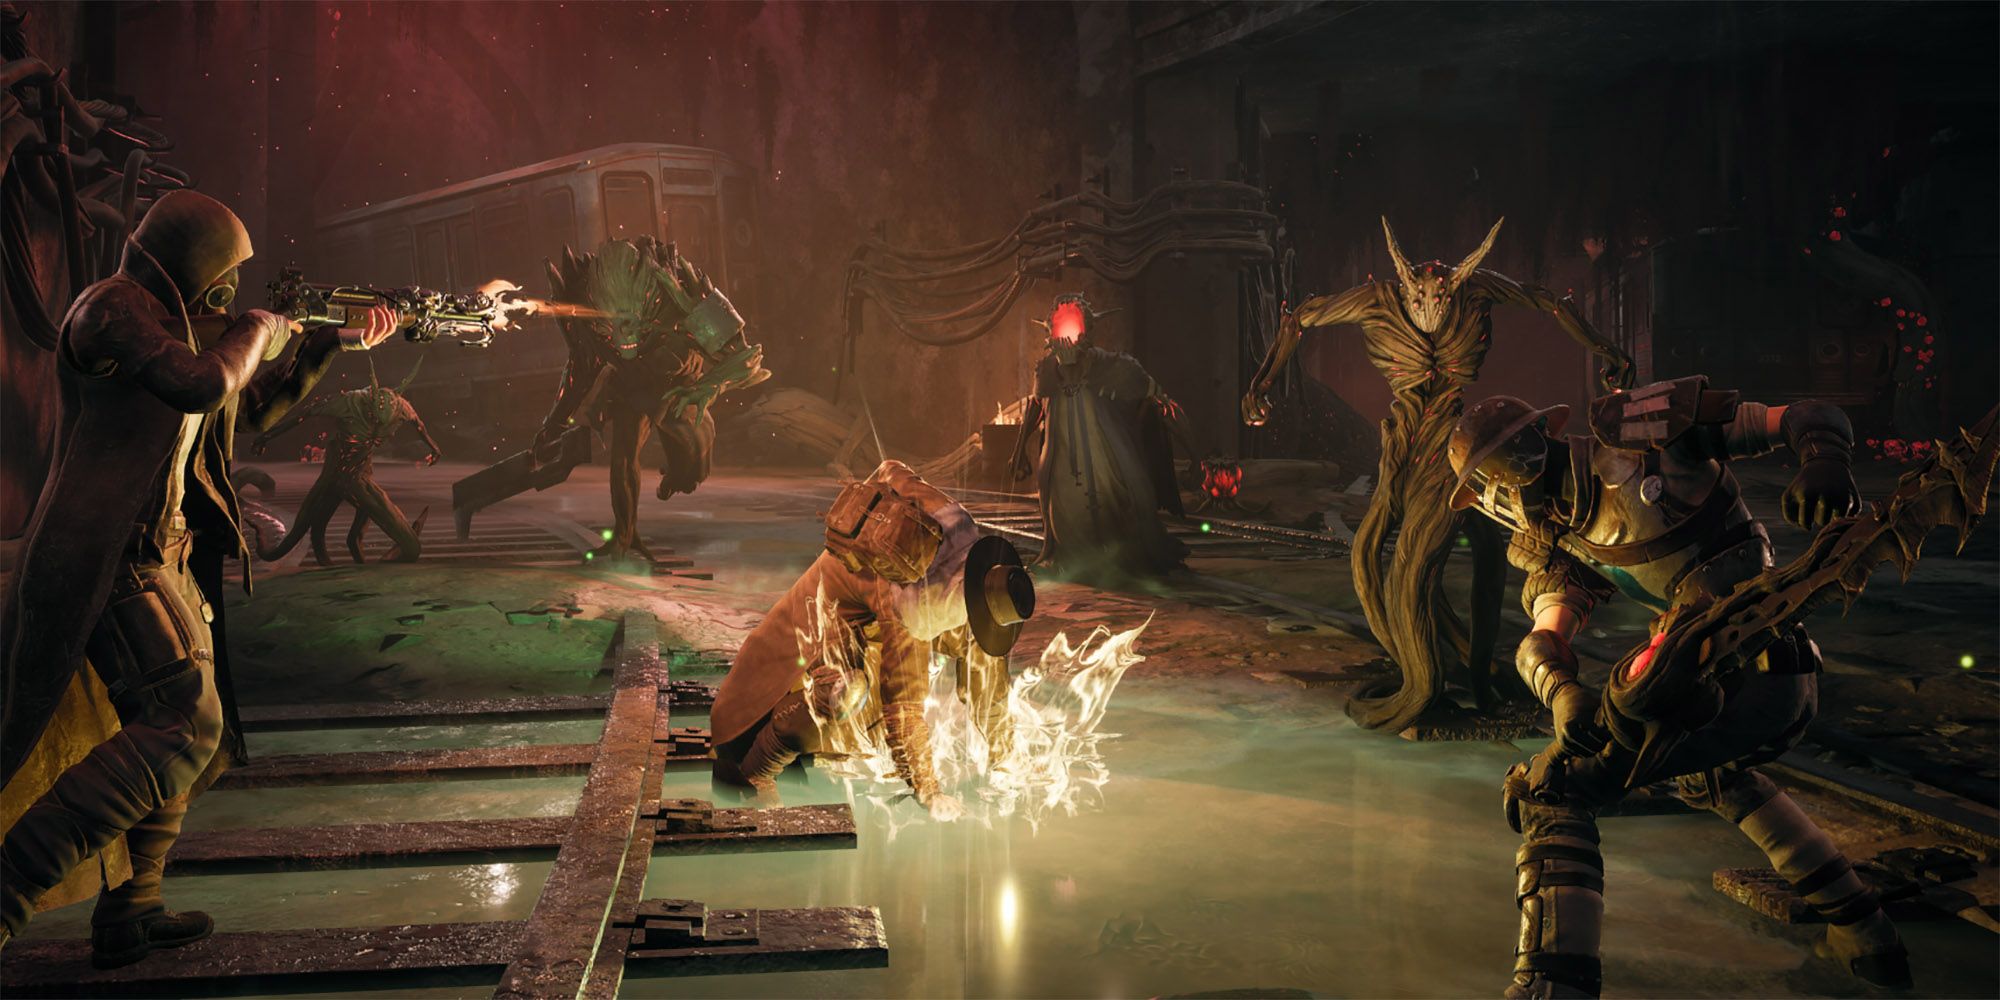 Remnant From The Ashes - Press Media Showing 3 Players Fighting Together During Remnant Campaign